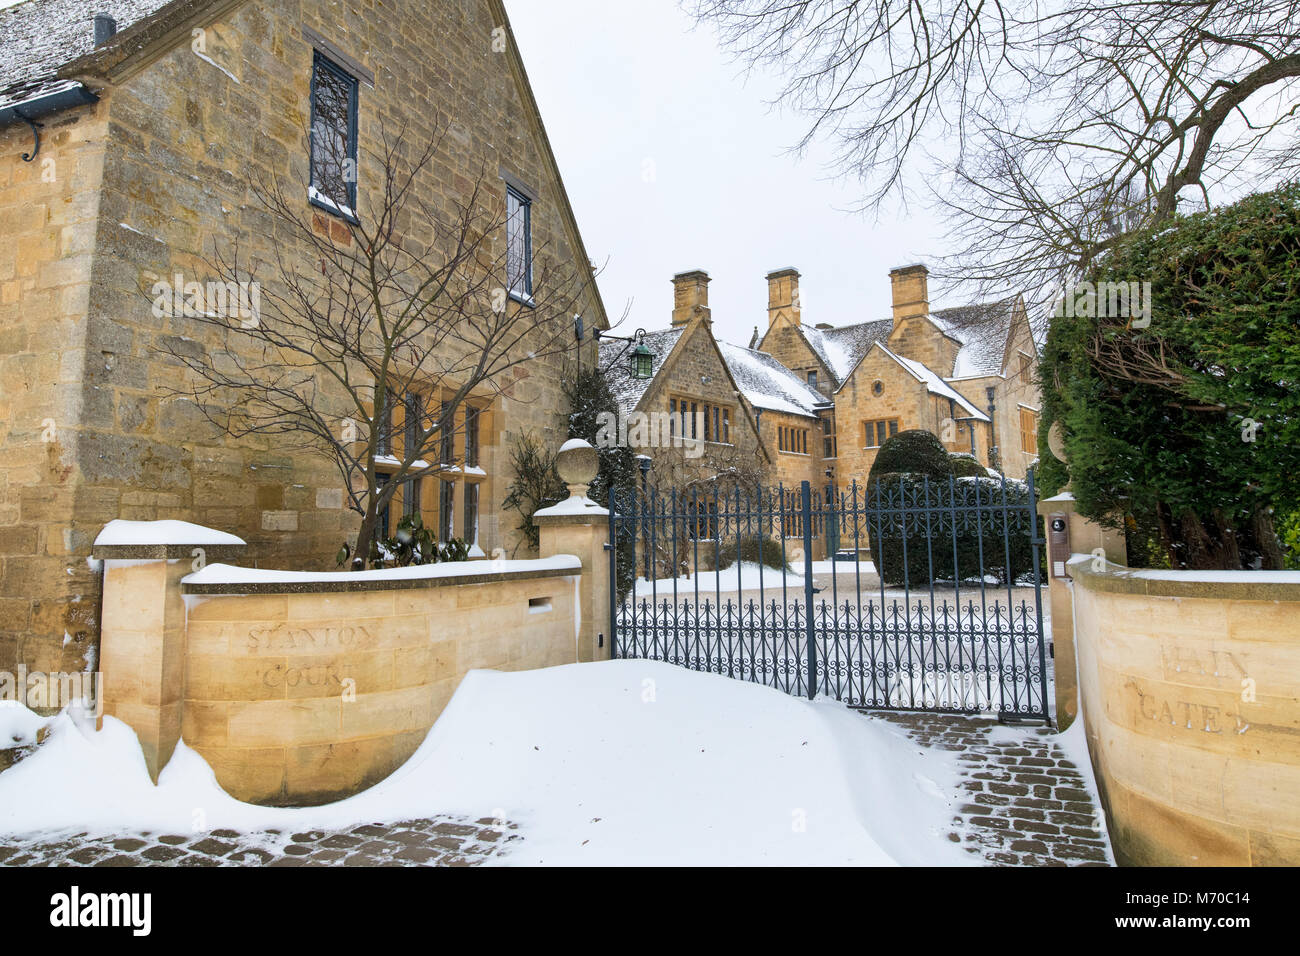 Stanton Court Jacobean Manor House nella neve d'inverno. Stanton, Cotswolds, Worcestershire, Inghilterra Foto Stock